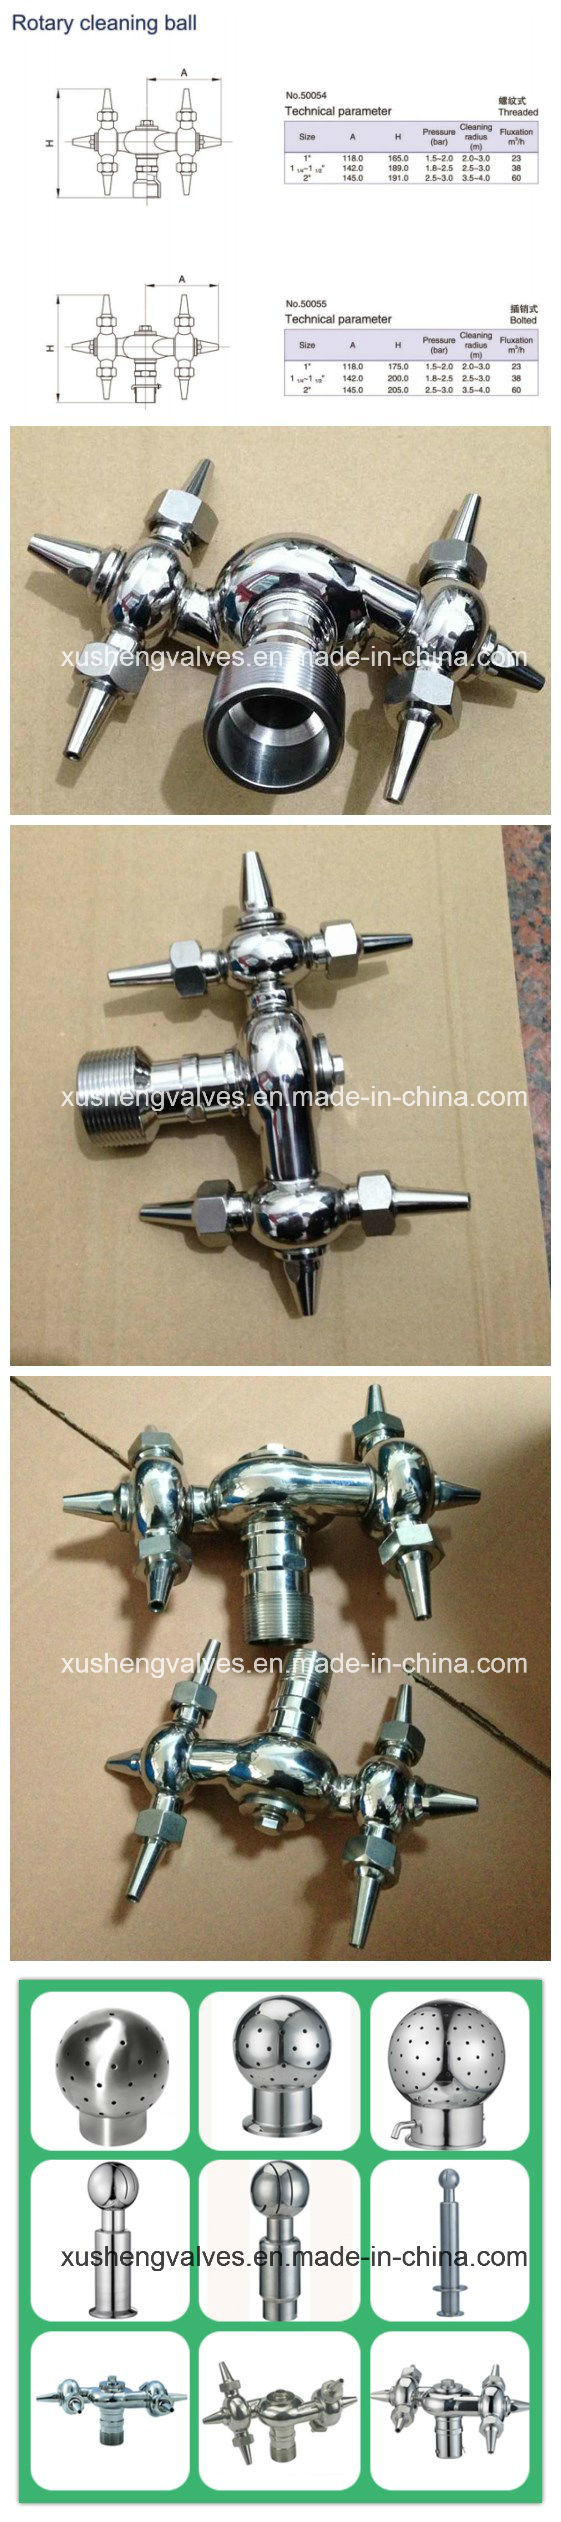 Stainless Steel Sanitary Ss304 BSPP Male Thread Rotating Washing Nozzle